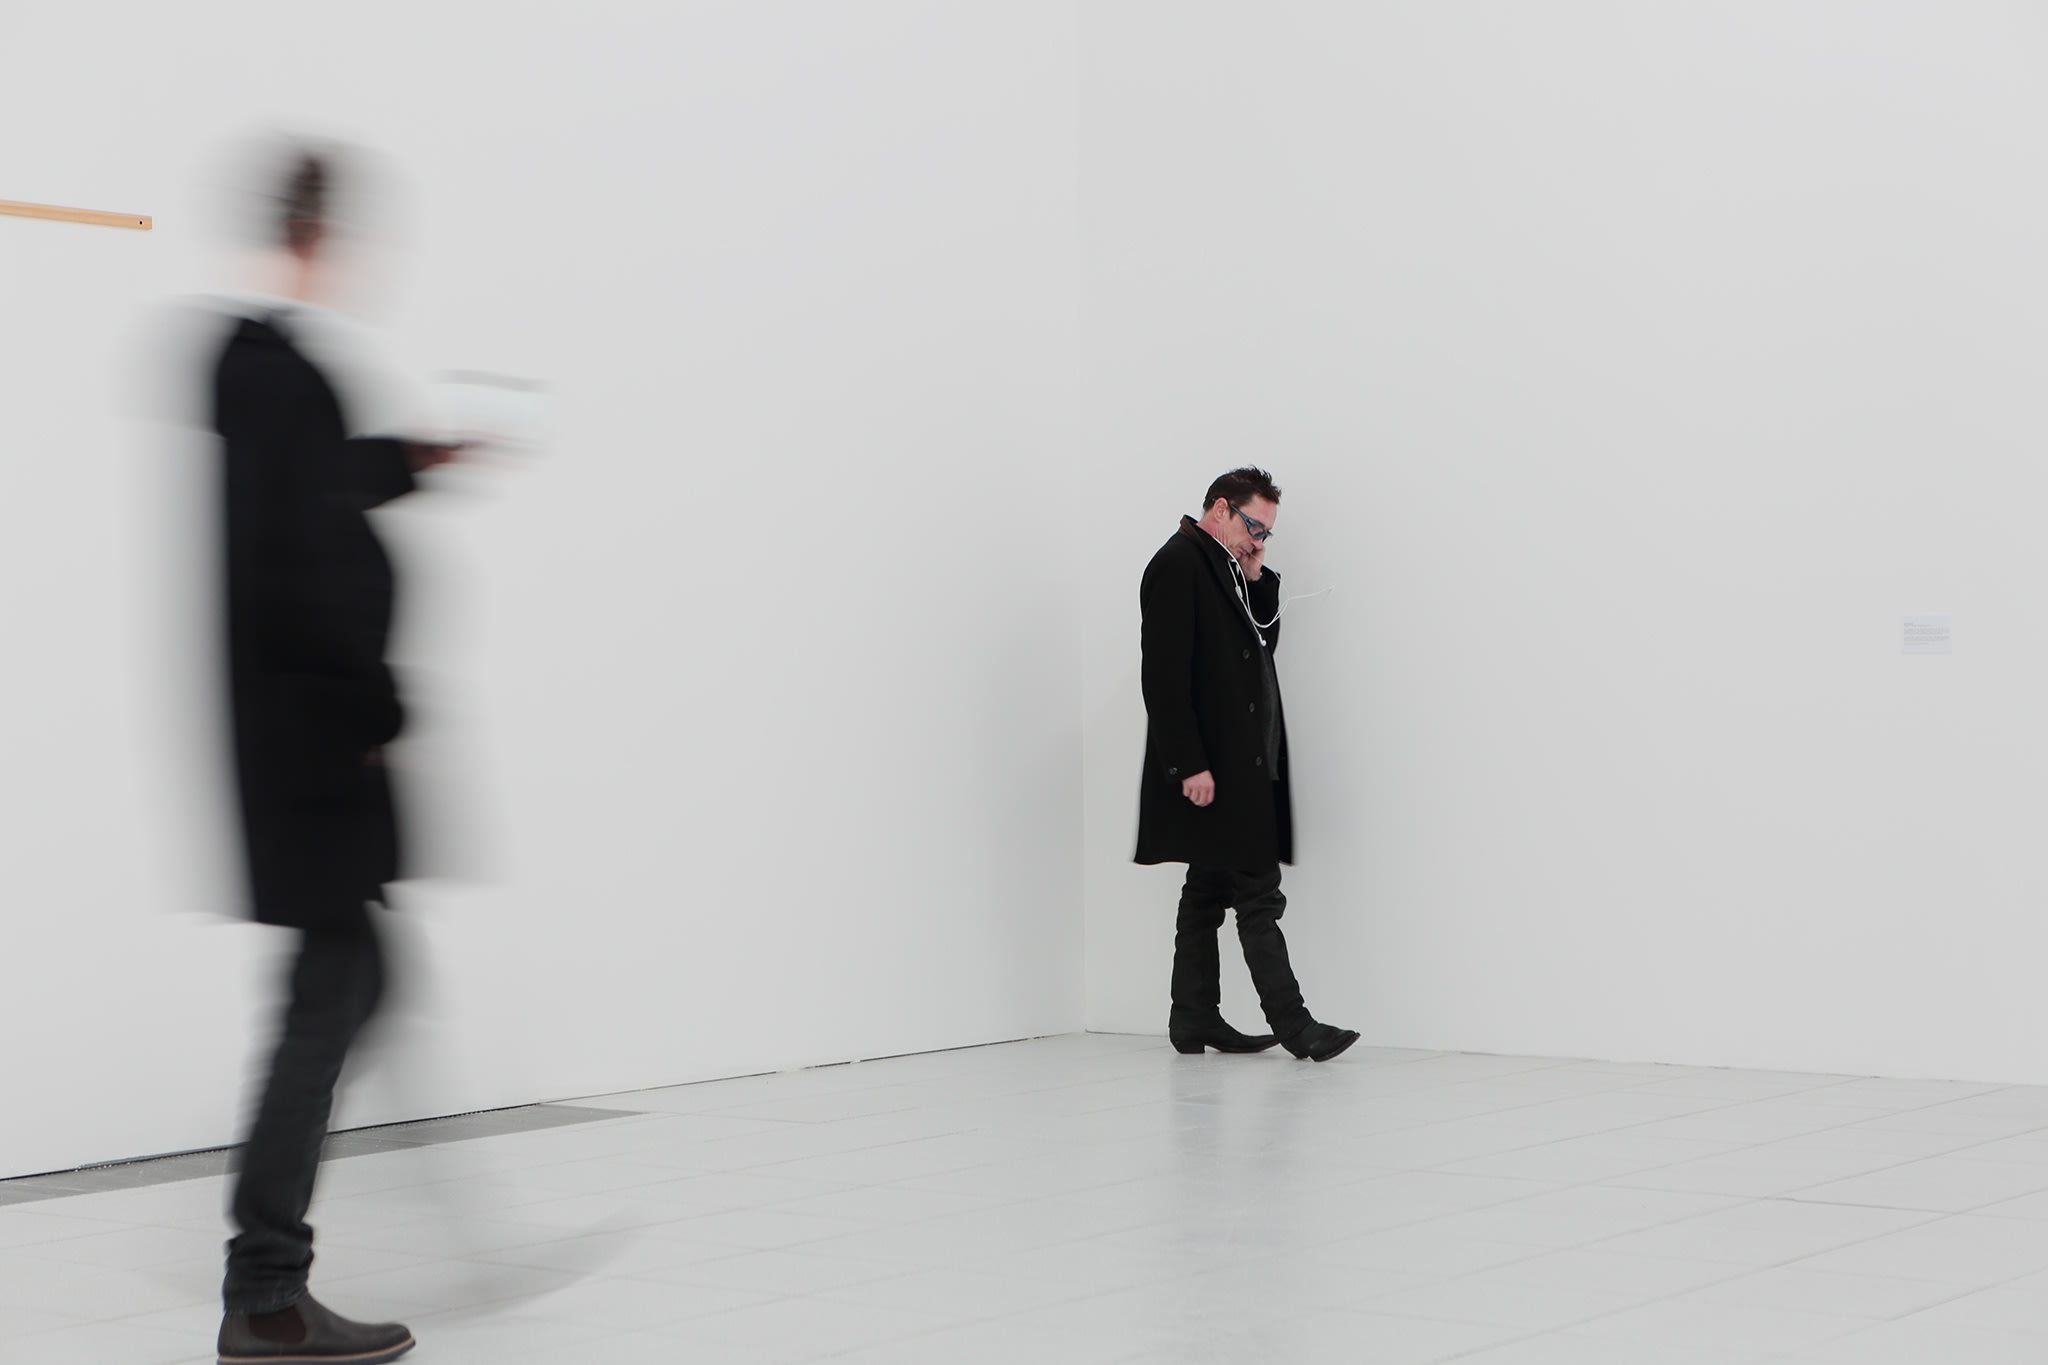 To stand amongst the elements and to interpret what one knows Ryan Gander